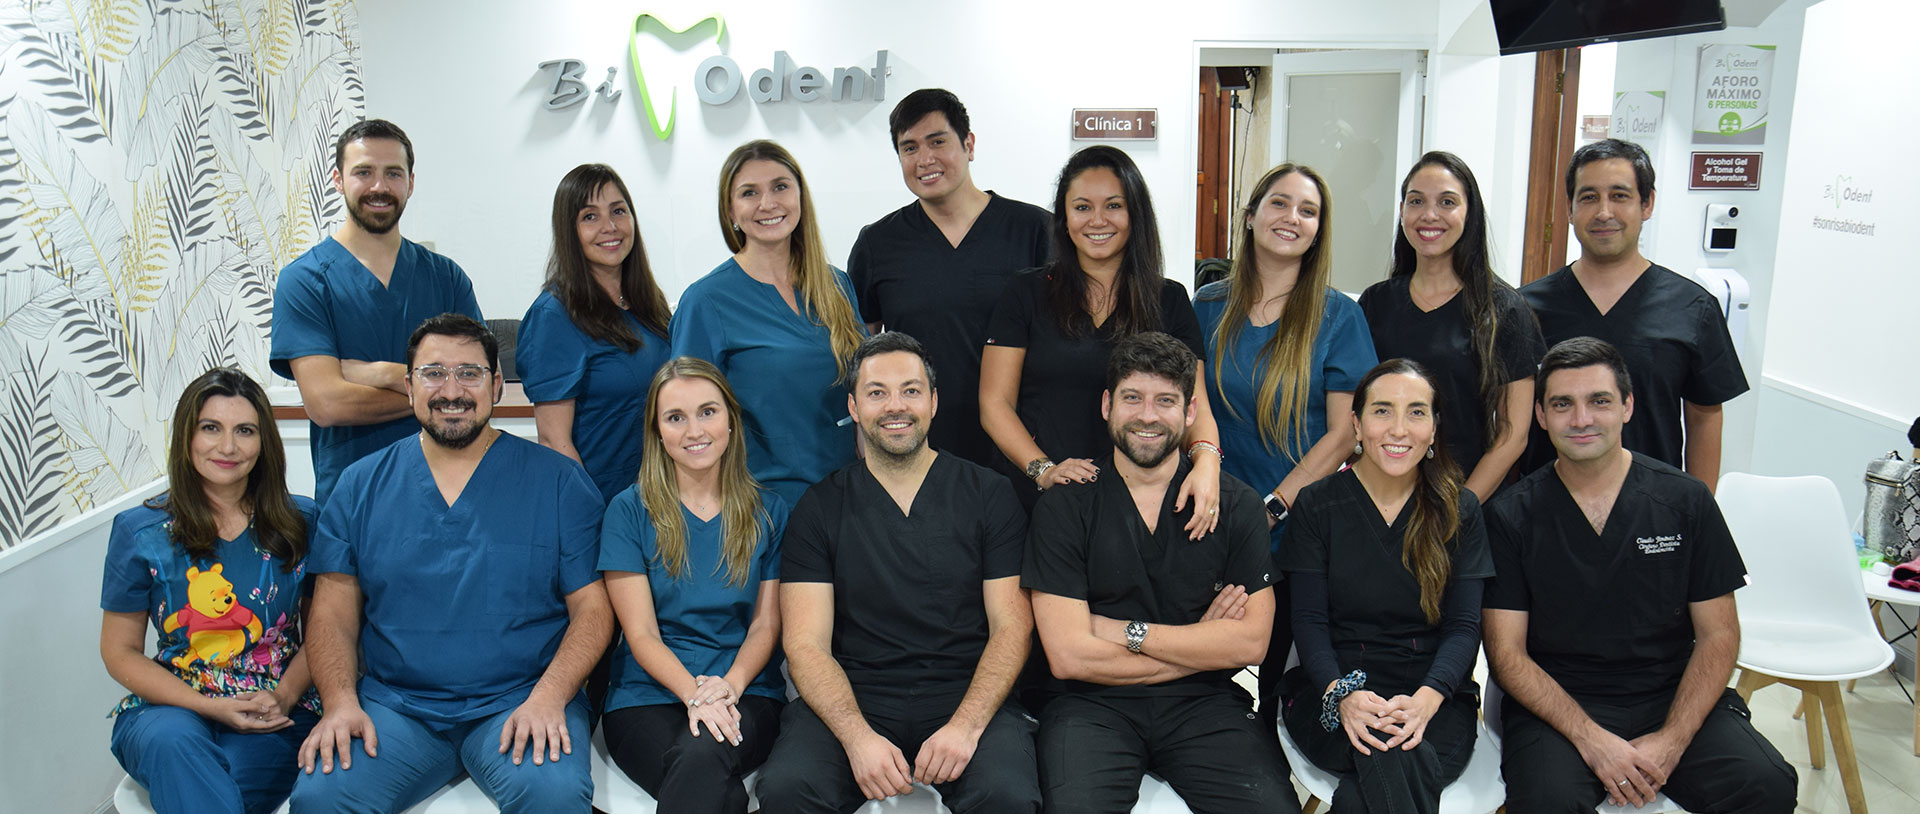 Equipo Clínica BIODENT